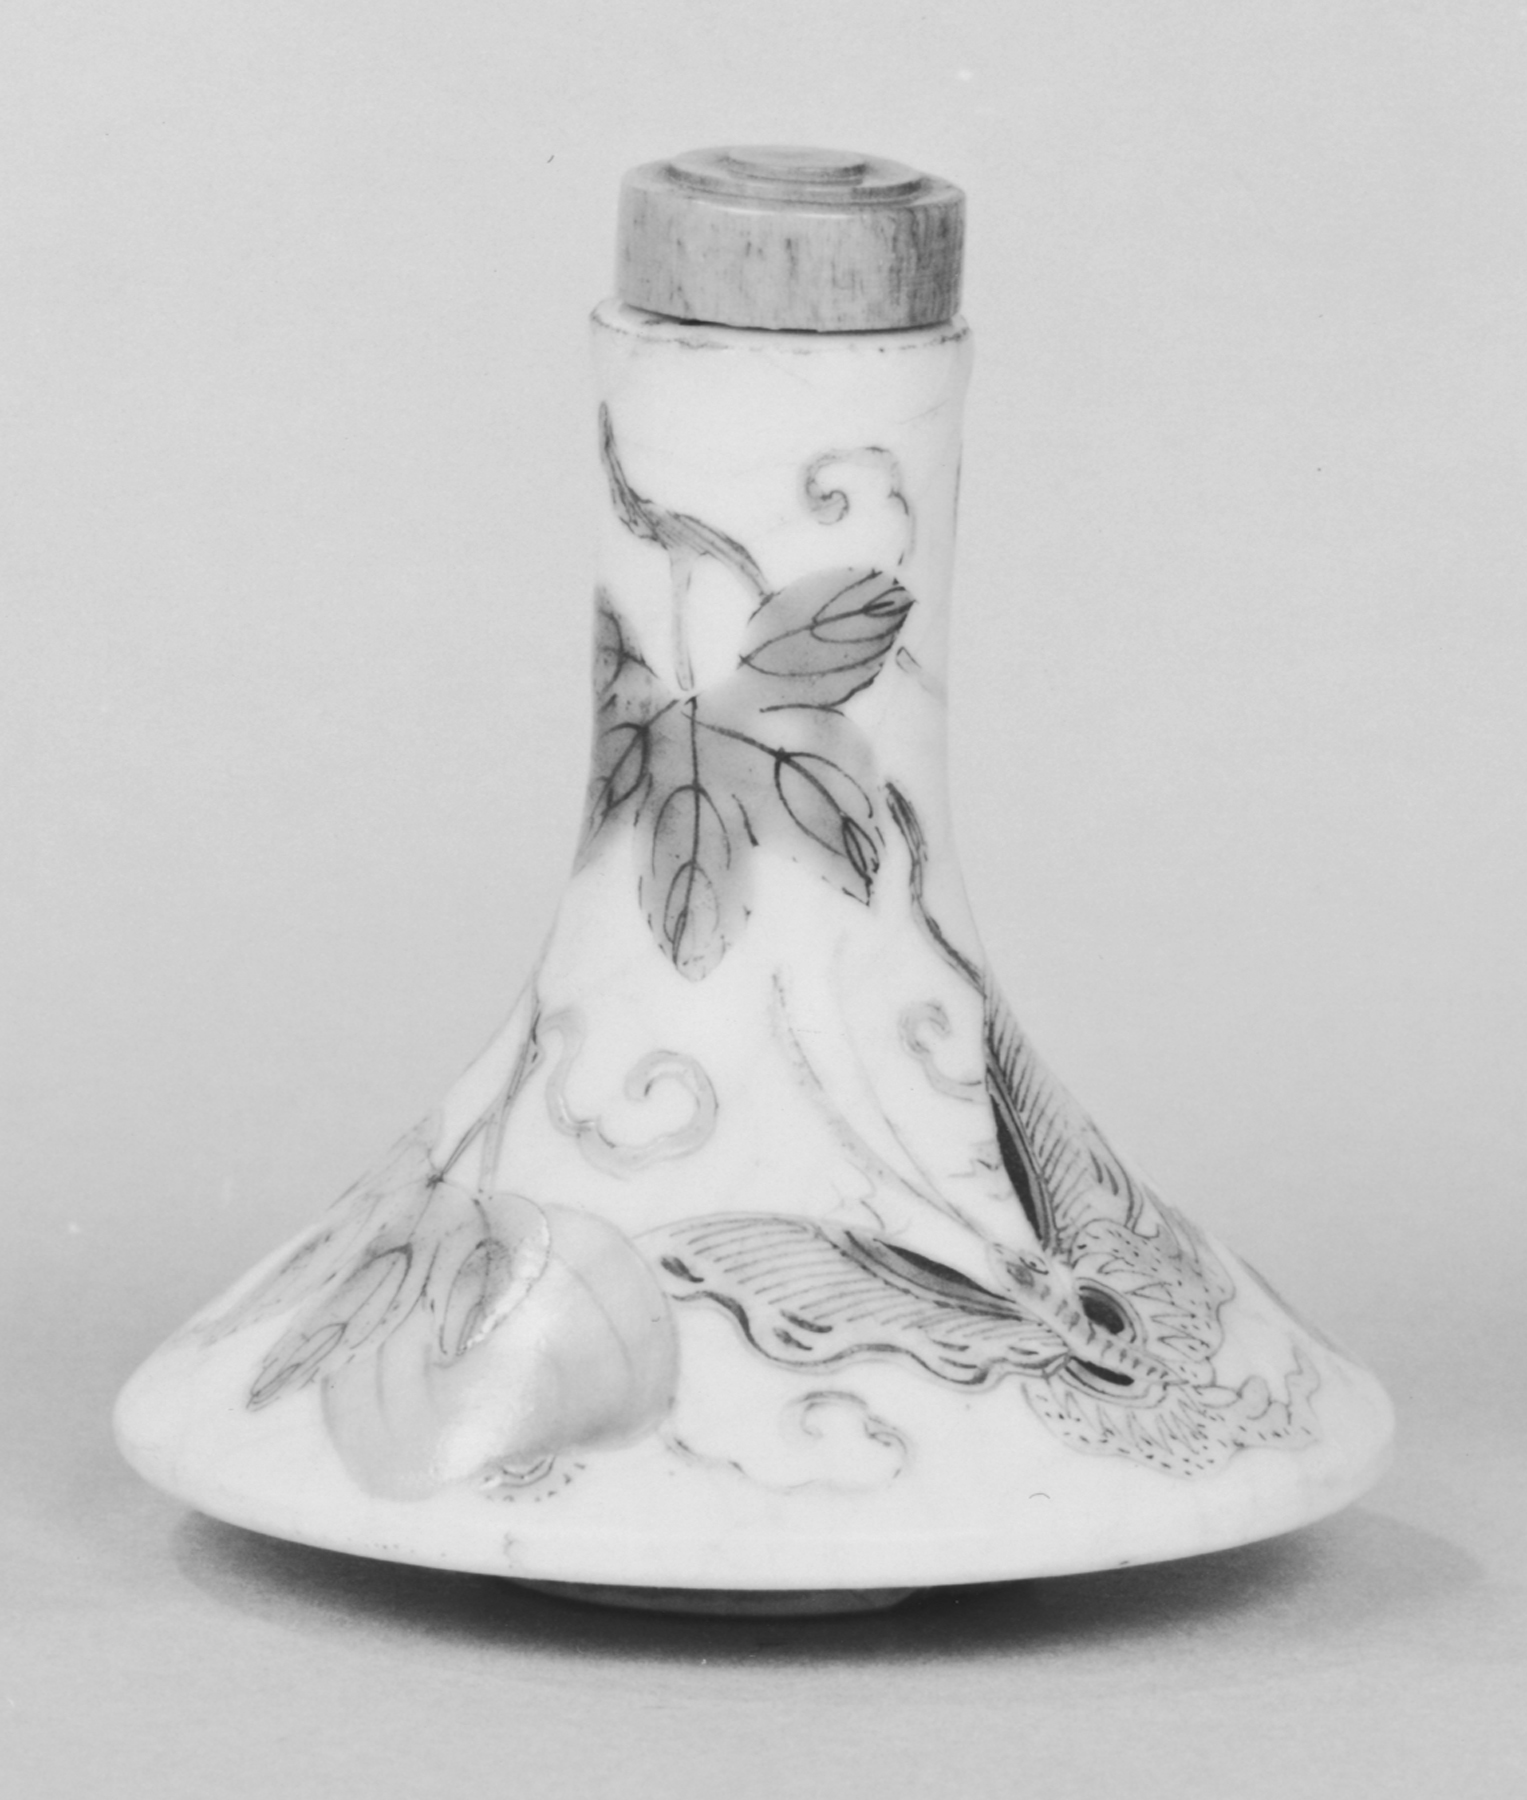 Image for Snuff Bottle with Butterflies and Melon Vine